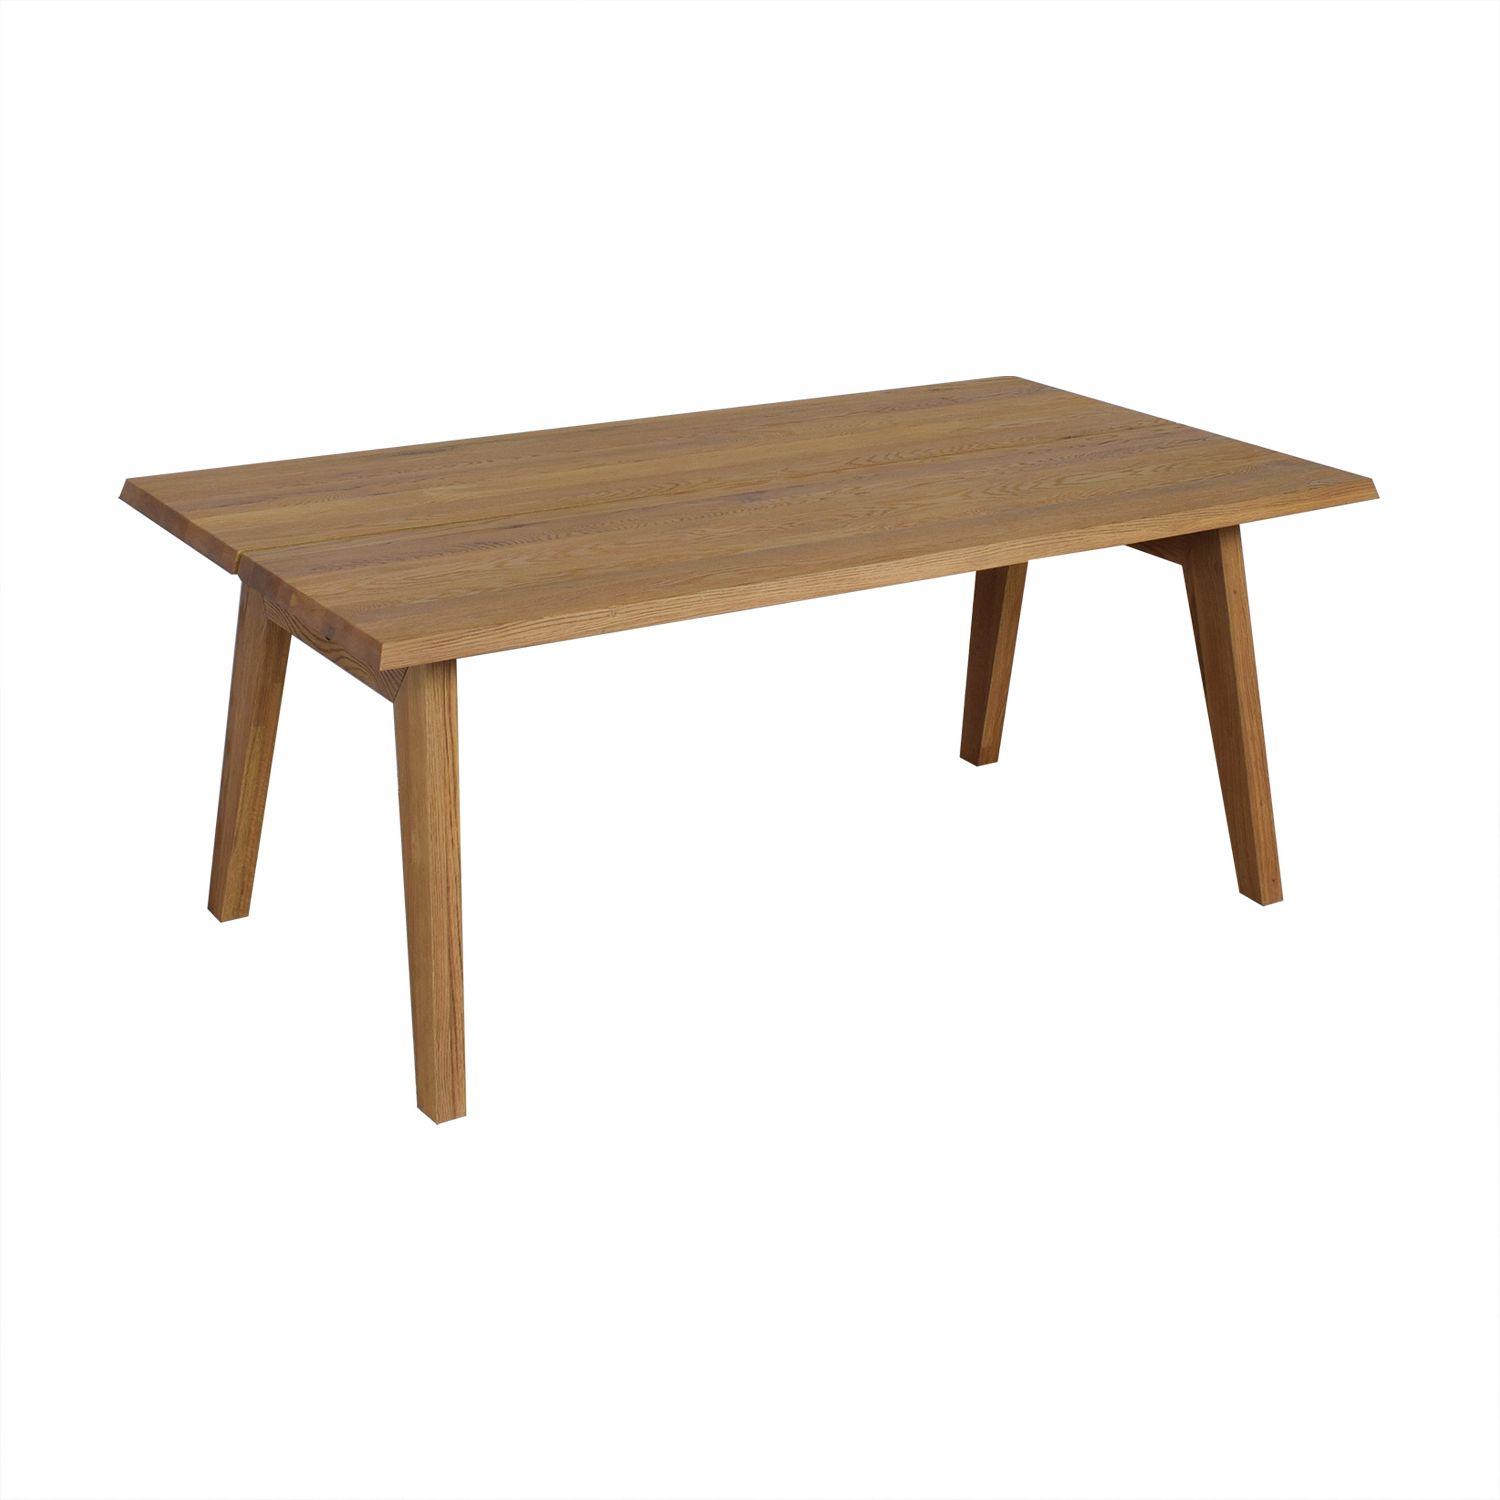 [%49% Off – Article Article Madera Dining Table / Tables Inside Preferred 49'' Dining Tables|49'' Dining Tables Throughout Trendy 49% Off – Article Article Madera Dining Table / Tables|best And Newest 49'' Dining Tables Within 49% Off – Article Article Madera Dining Table / Tables|well Known 49% Off – Article Article Madera Dining Table / Tables Pertaining To 49'' Dining Tables%] (Gallery 3 of 20)